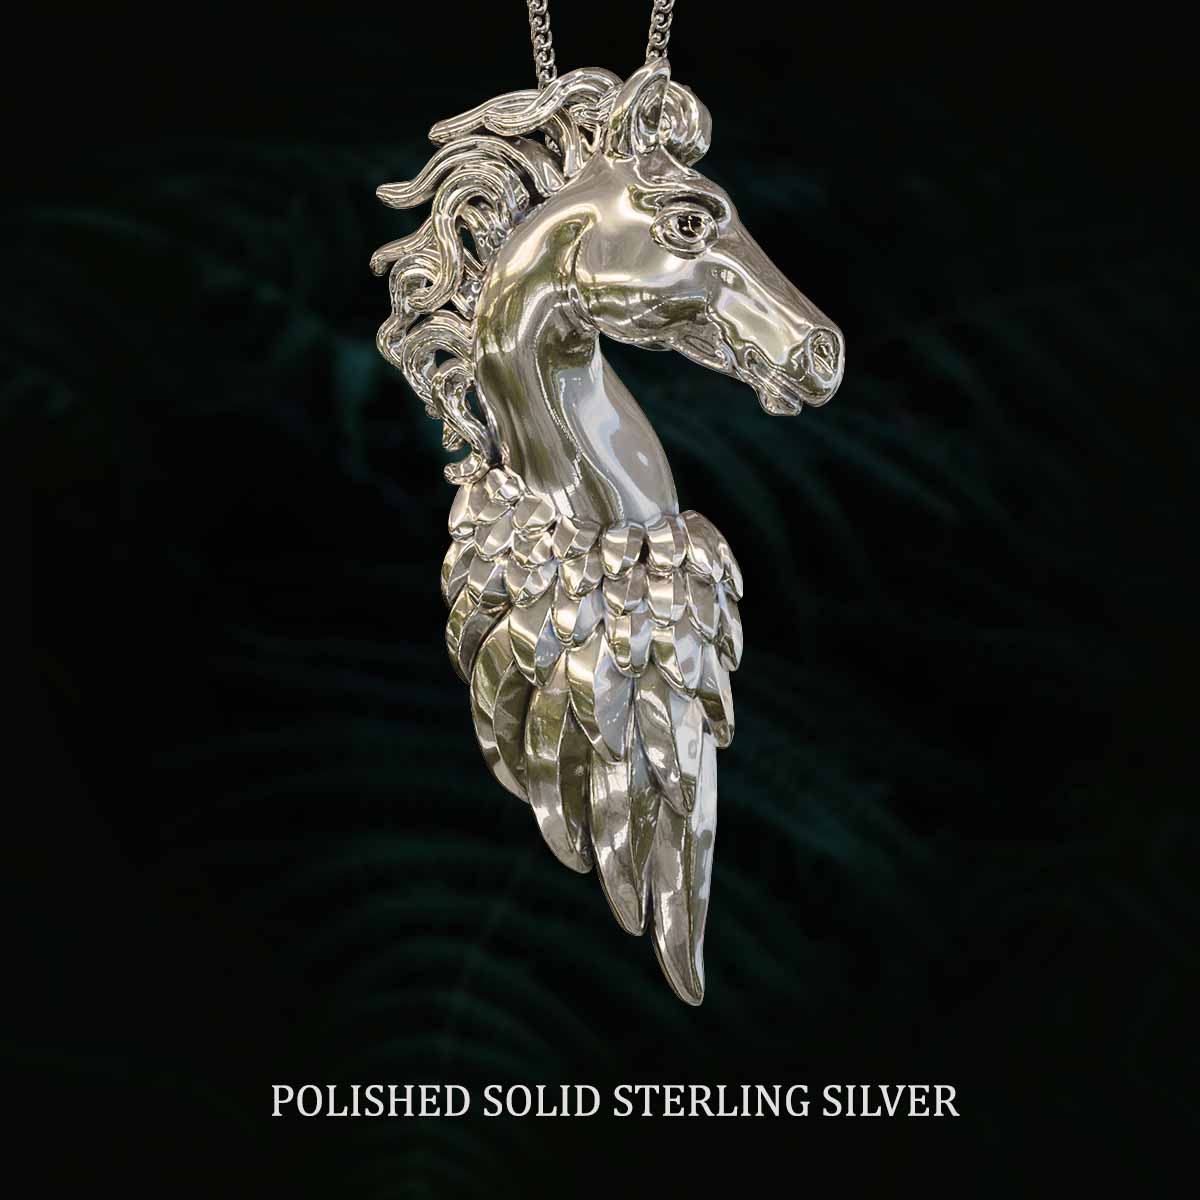     Polished-Solid-Sterling-Silver-Pegasus-Pendant-Jewelry-For-Necklace